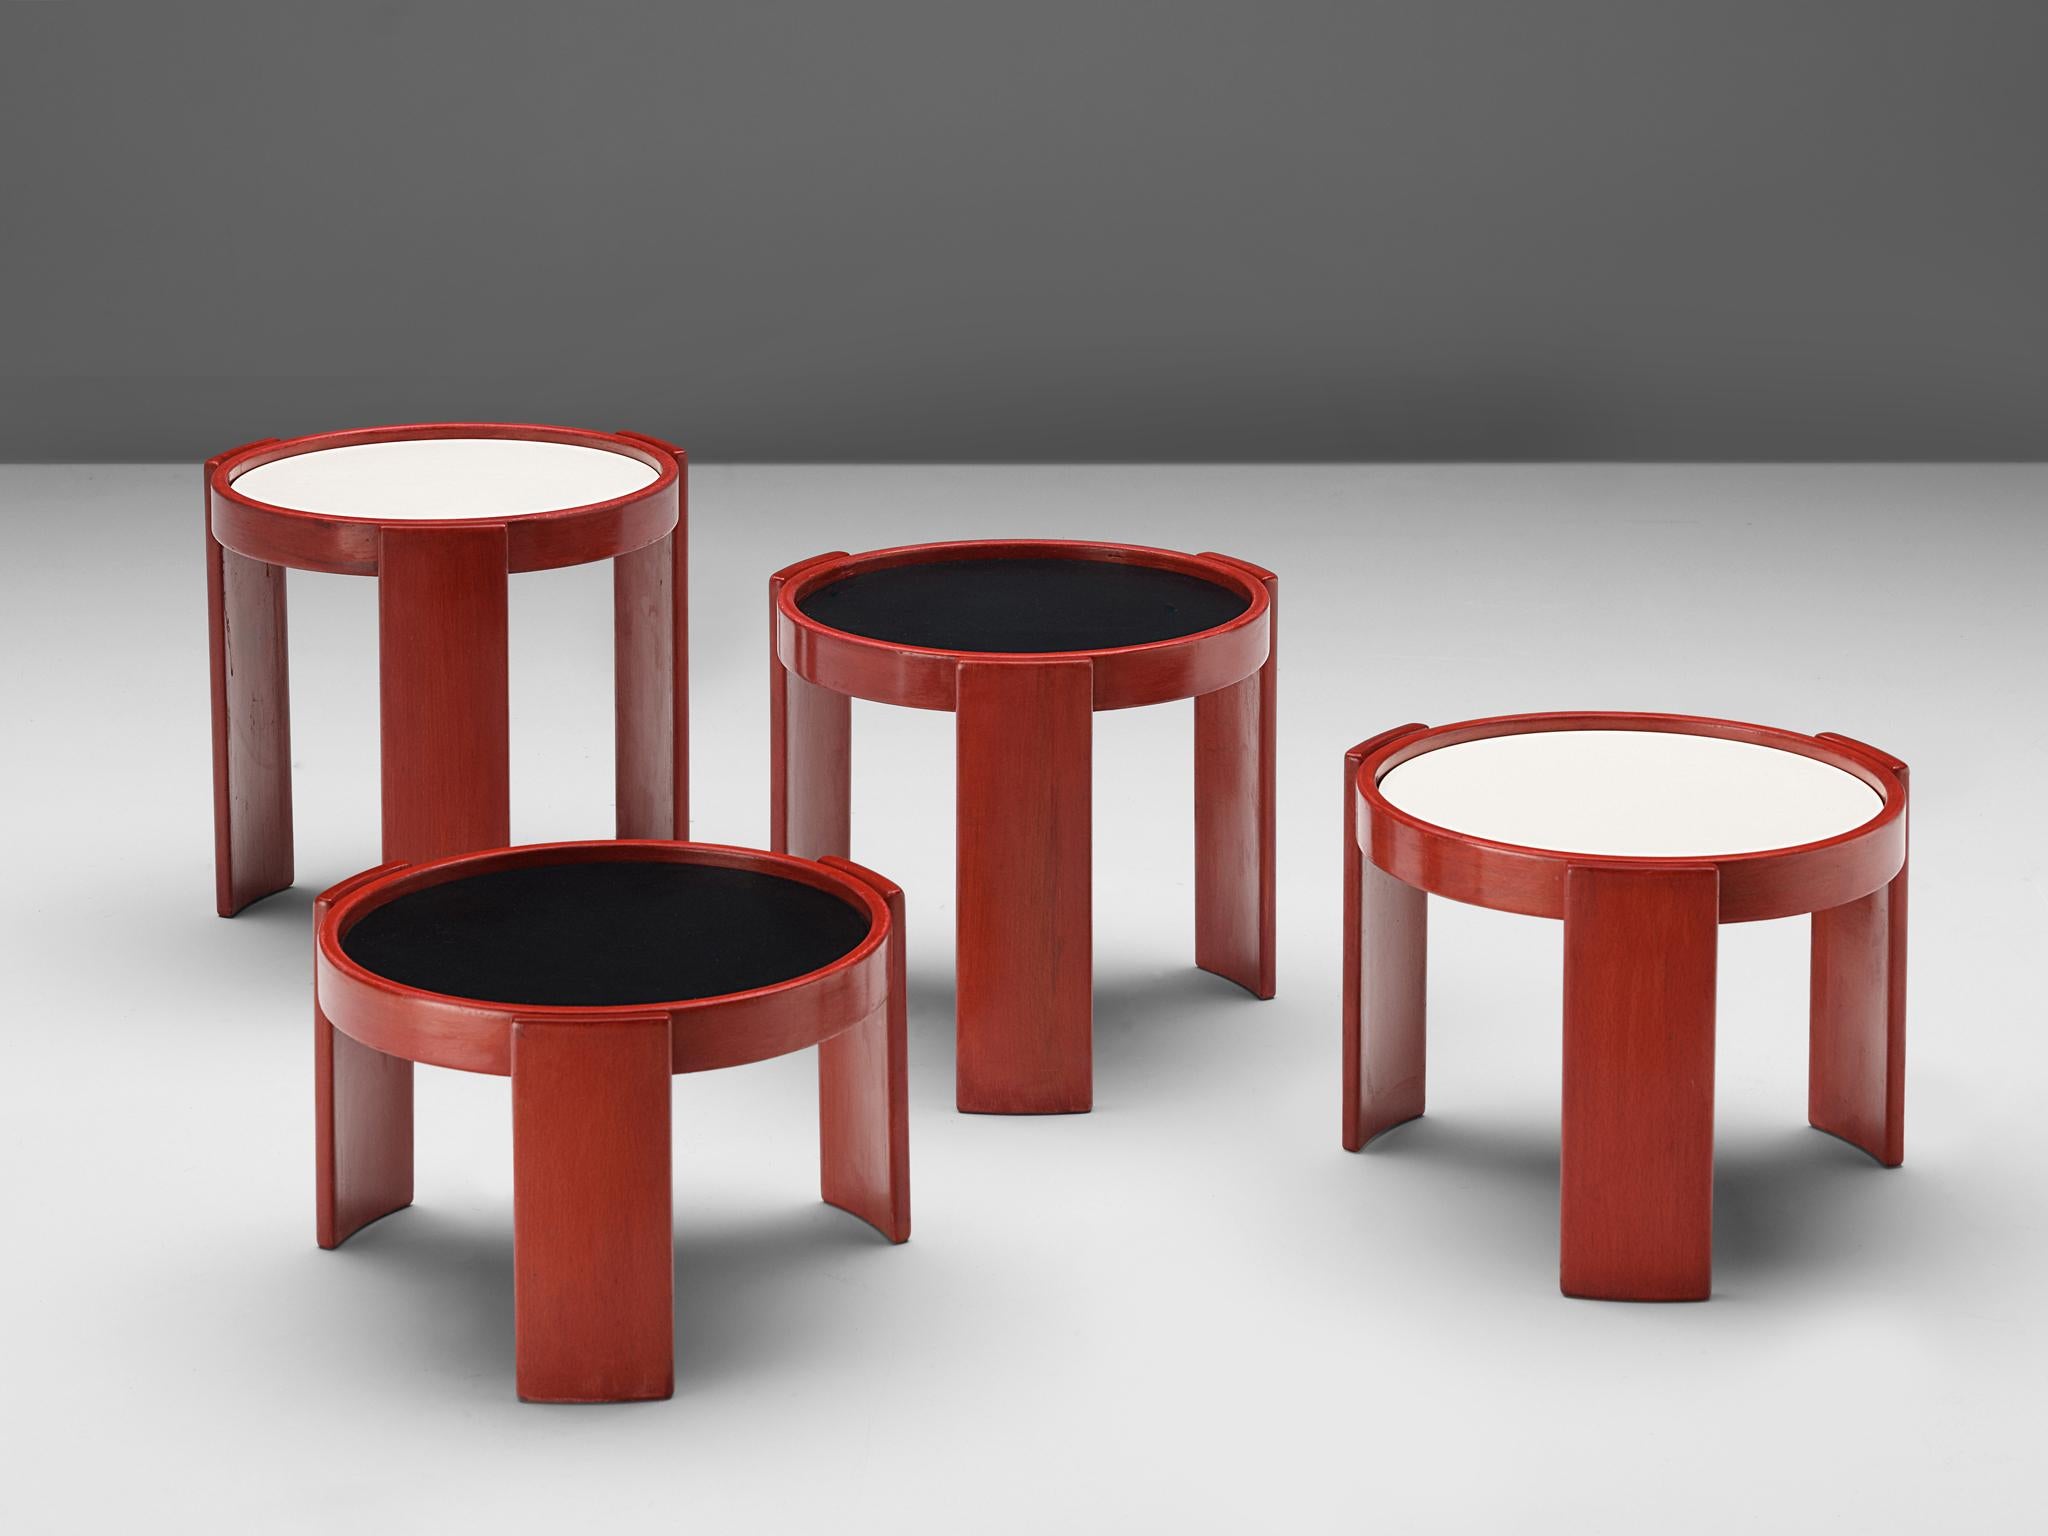 Gianfranco Frattini for Cassina, nesting table, red, black and white lacquered wood, Italy, 1960s.

Nesting tables consisting of four different pieces, designed by Gianfranco Frattini for Cassina. All the tables are, round shaped and of different